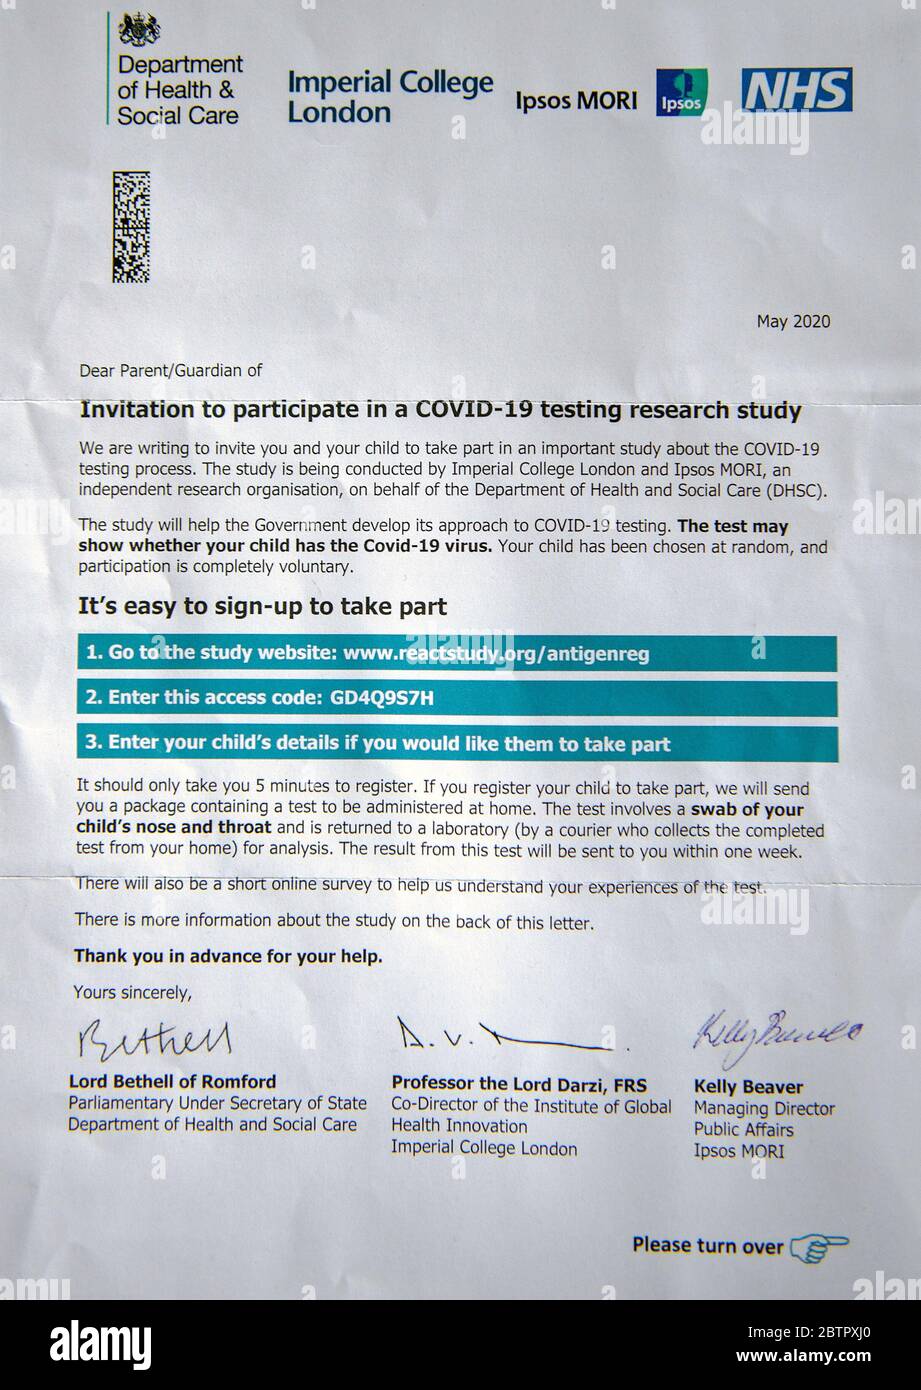 Covid-19 Research Request Letter Stock Photo